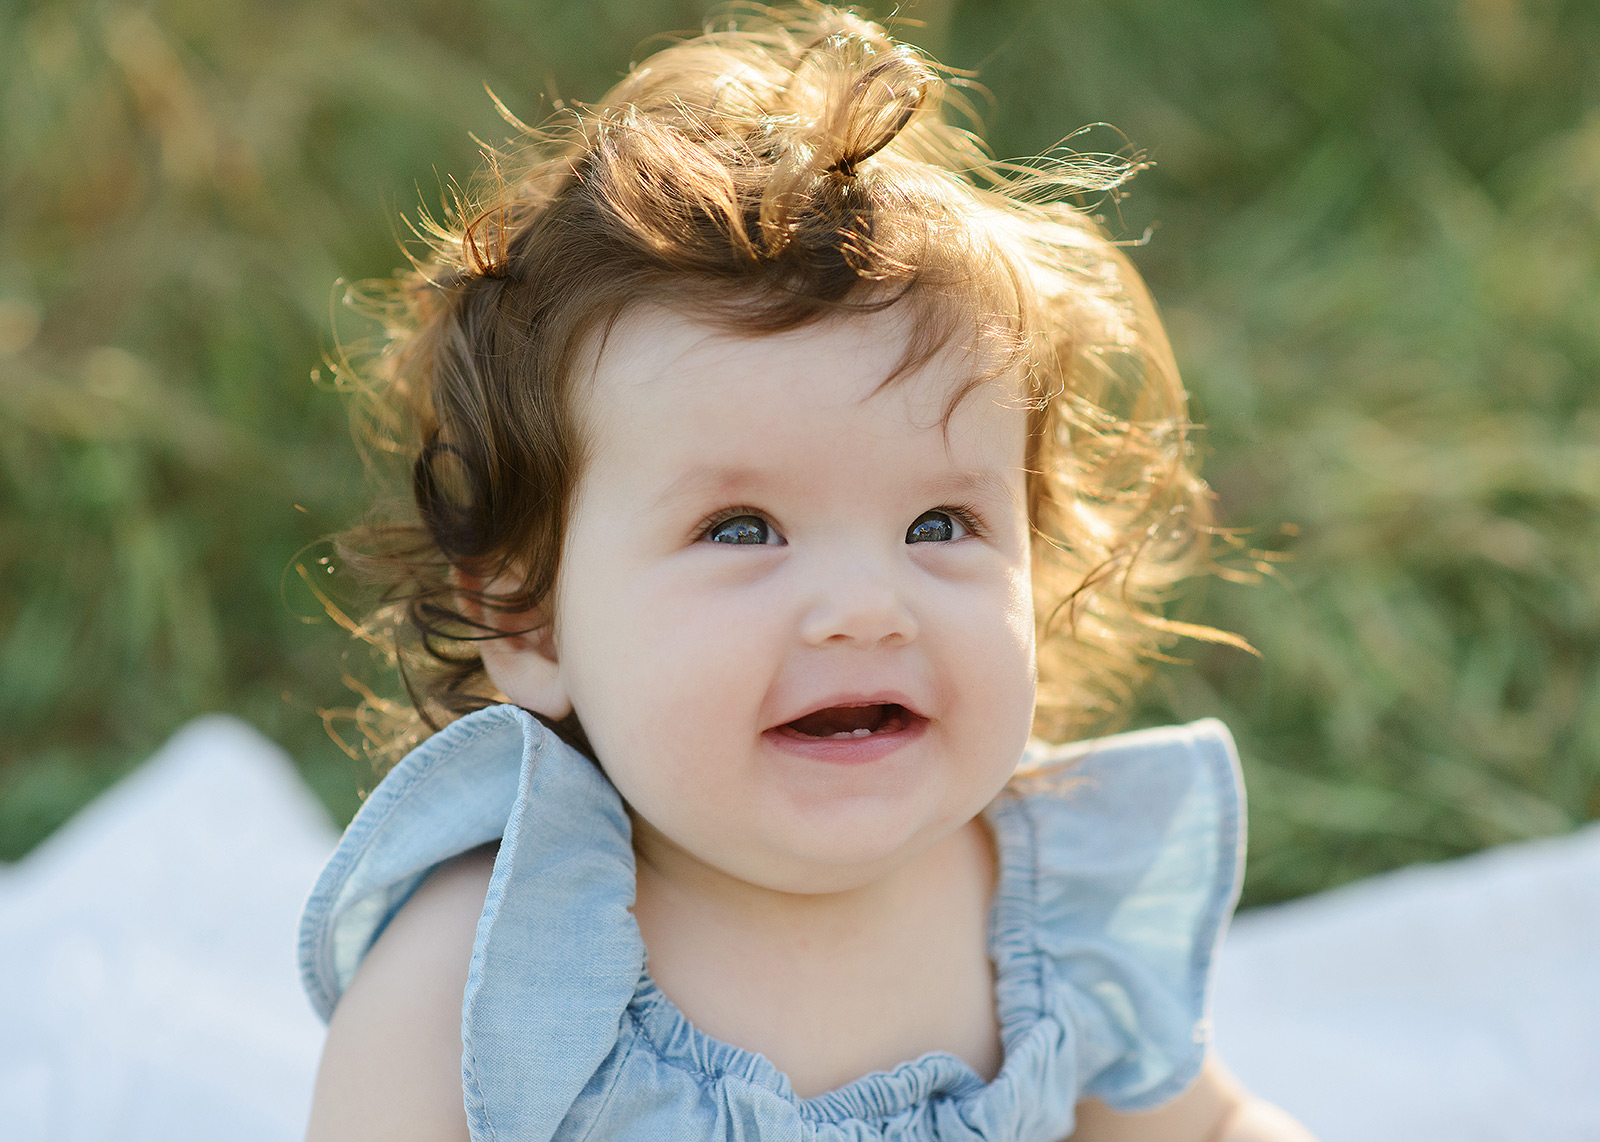 Smiling baby with curly hair in the sun and chambray dress